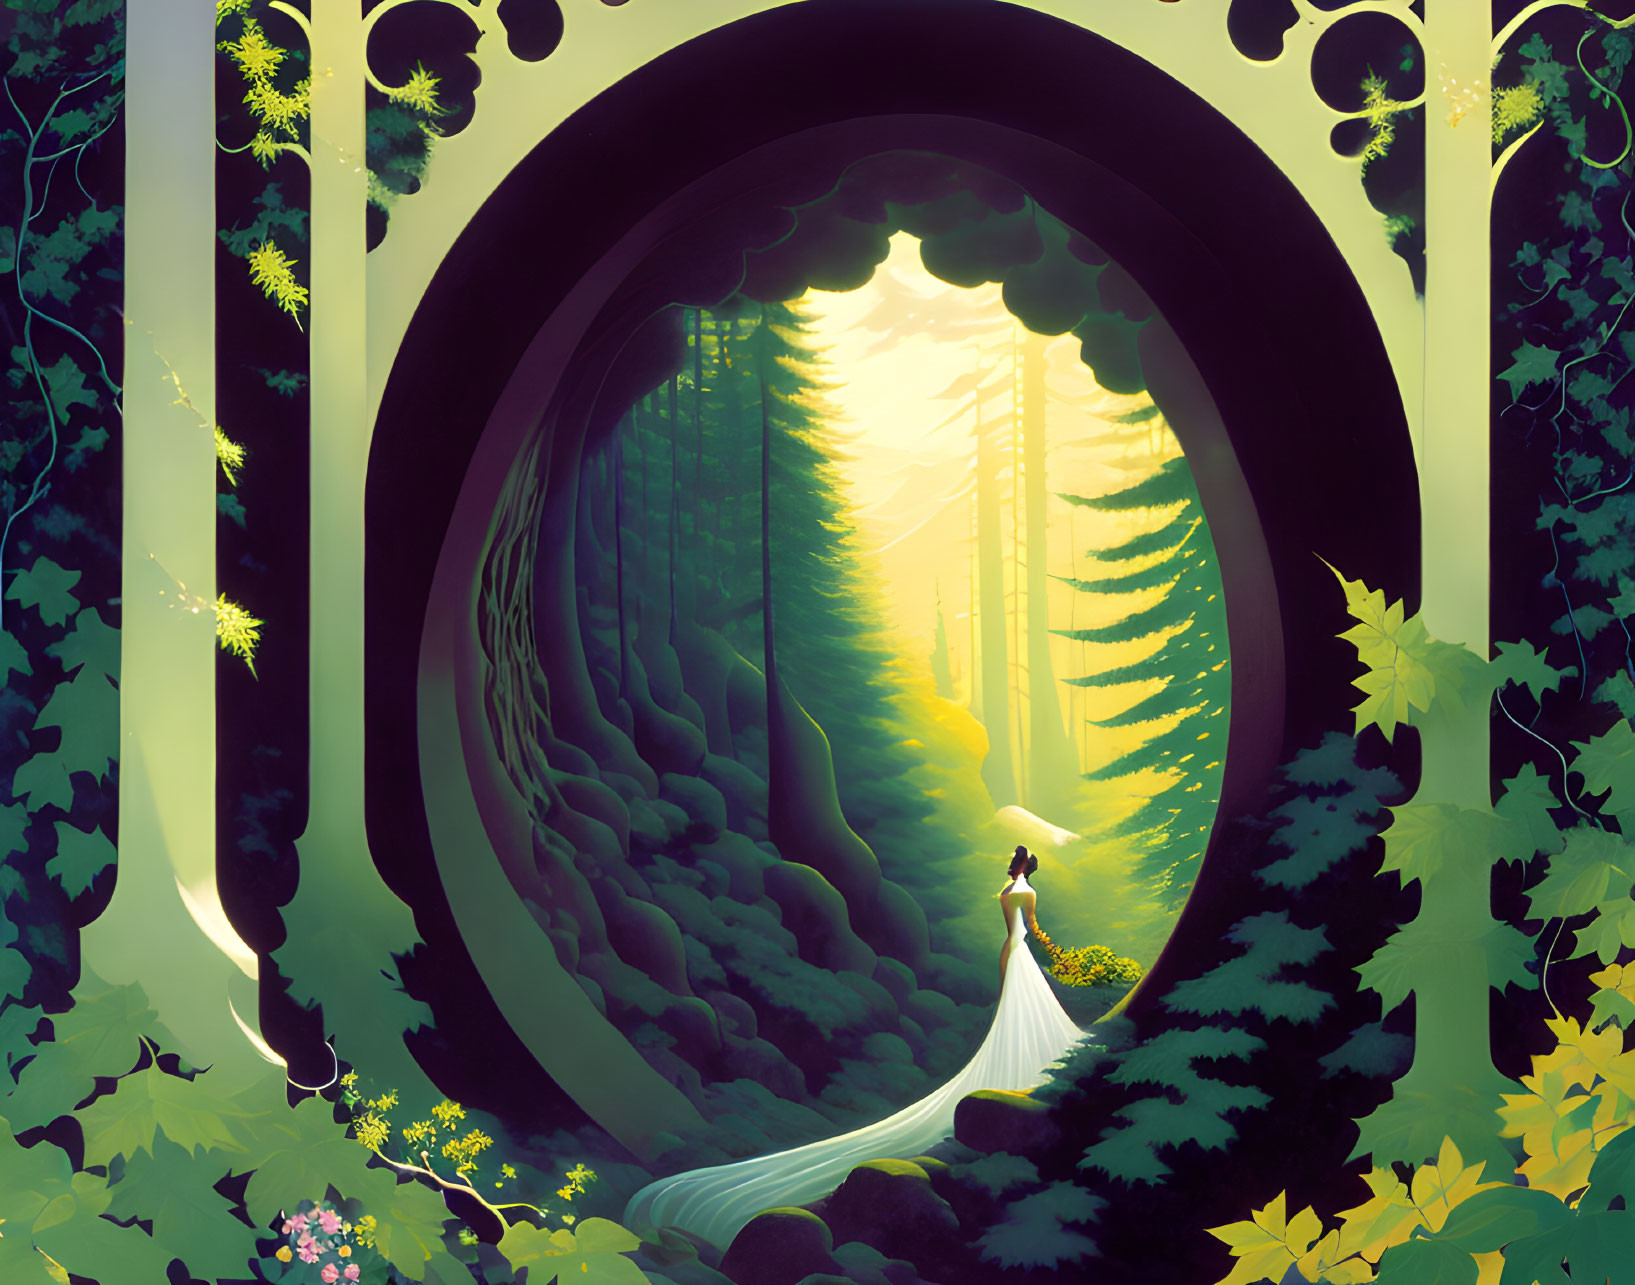 Solitary figure in forest tunnel entrance with warm light and lush greenery